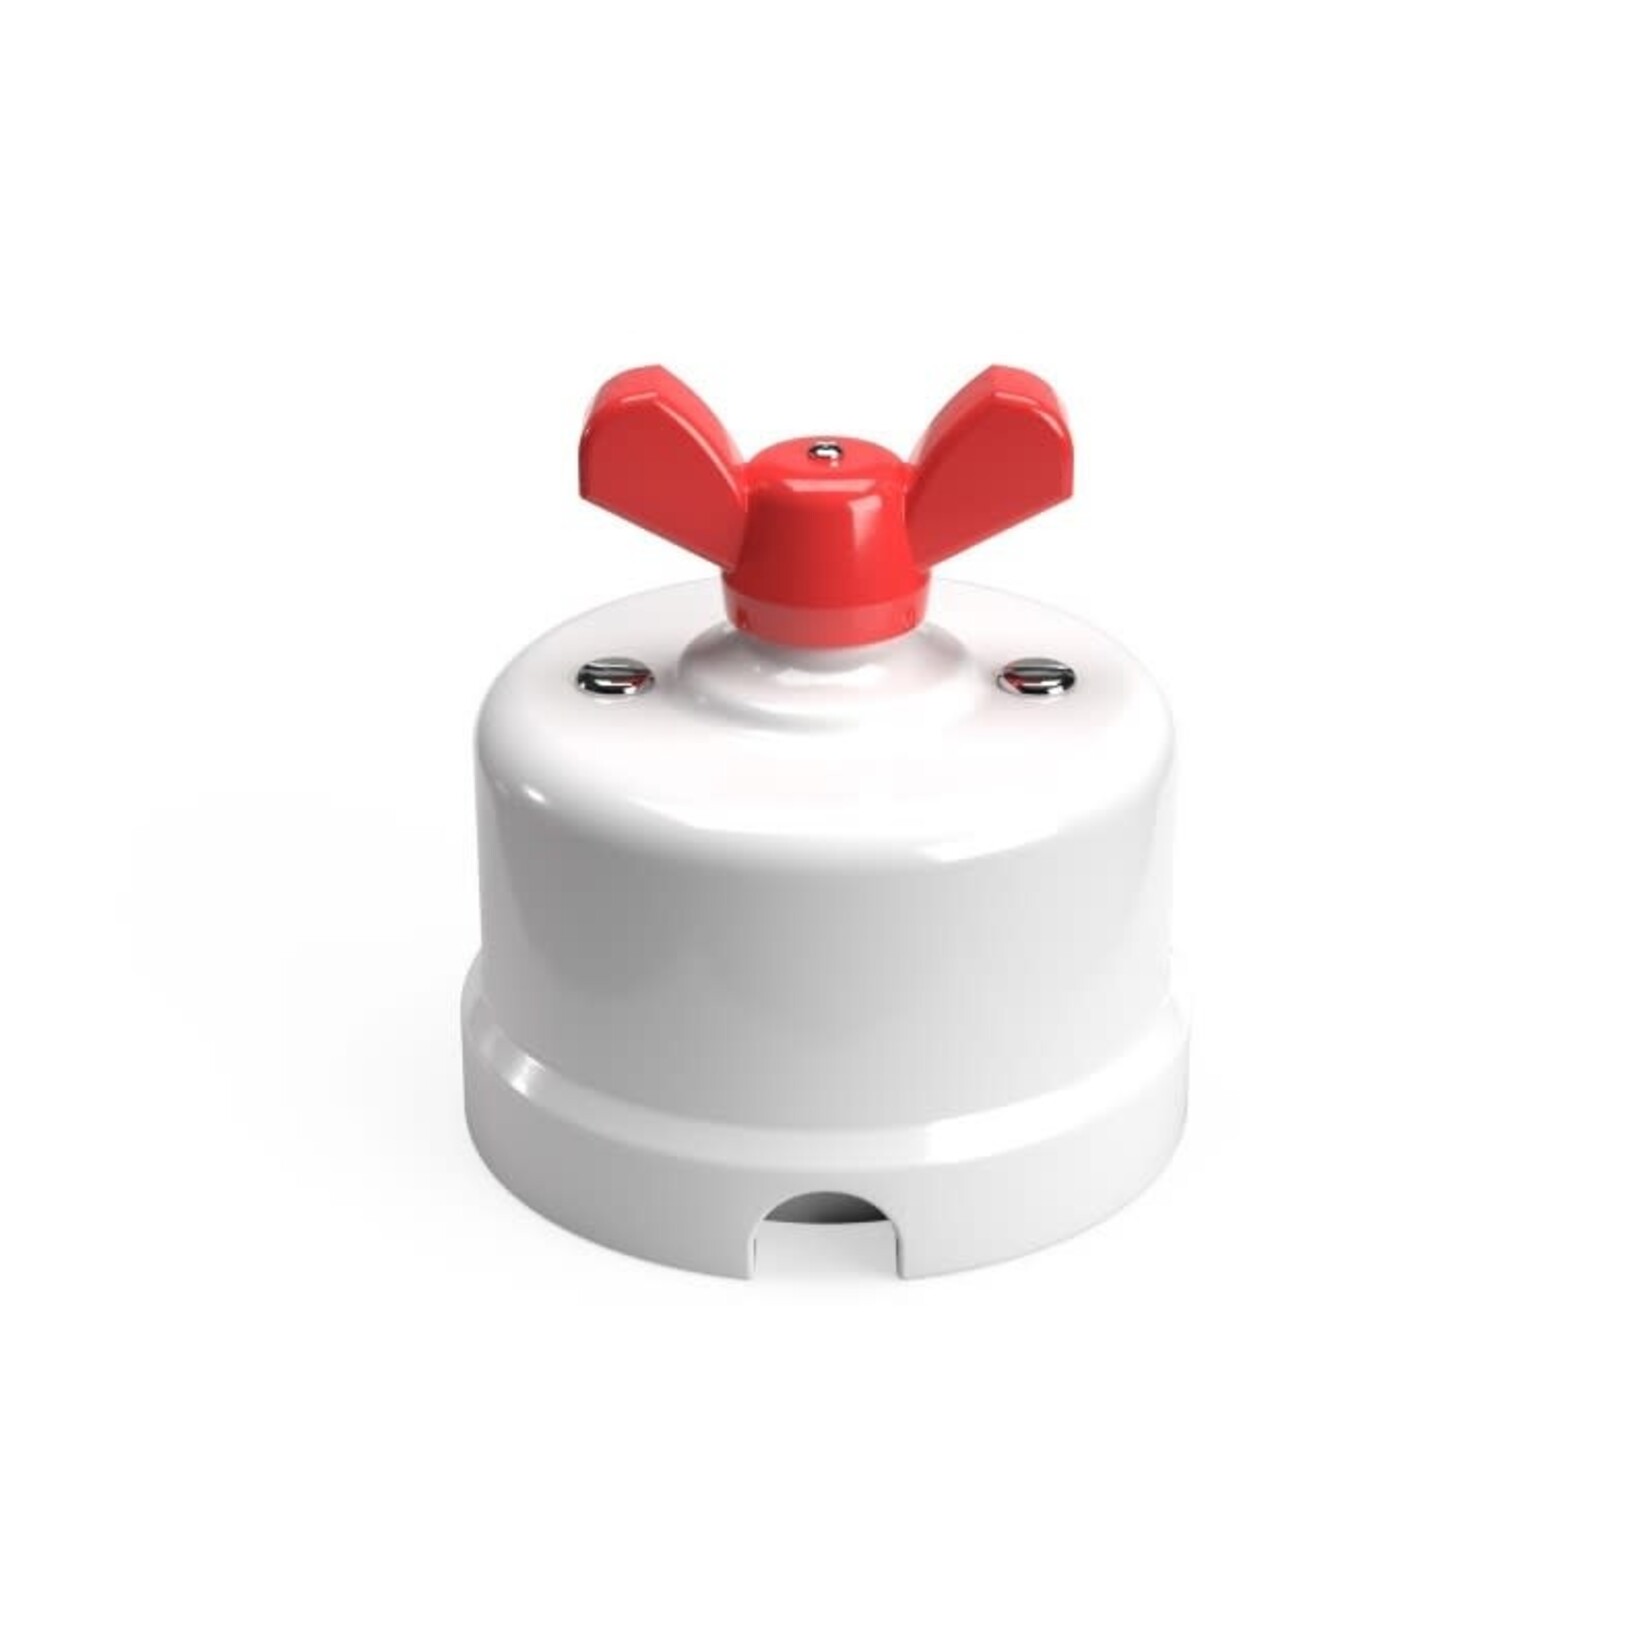 CCIT Switch/Diverter in white porcelain with RED butterfly nut